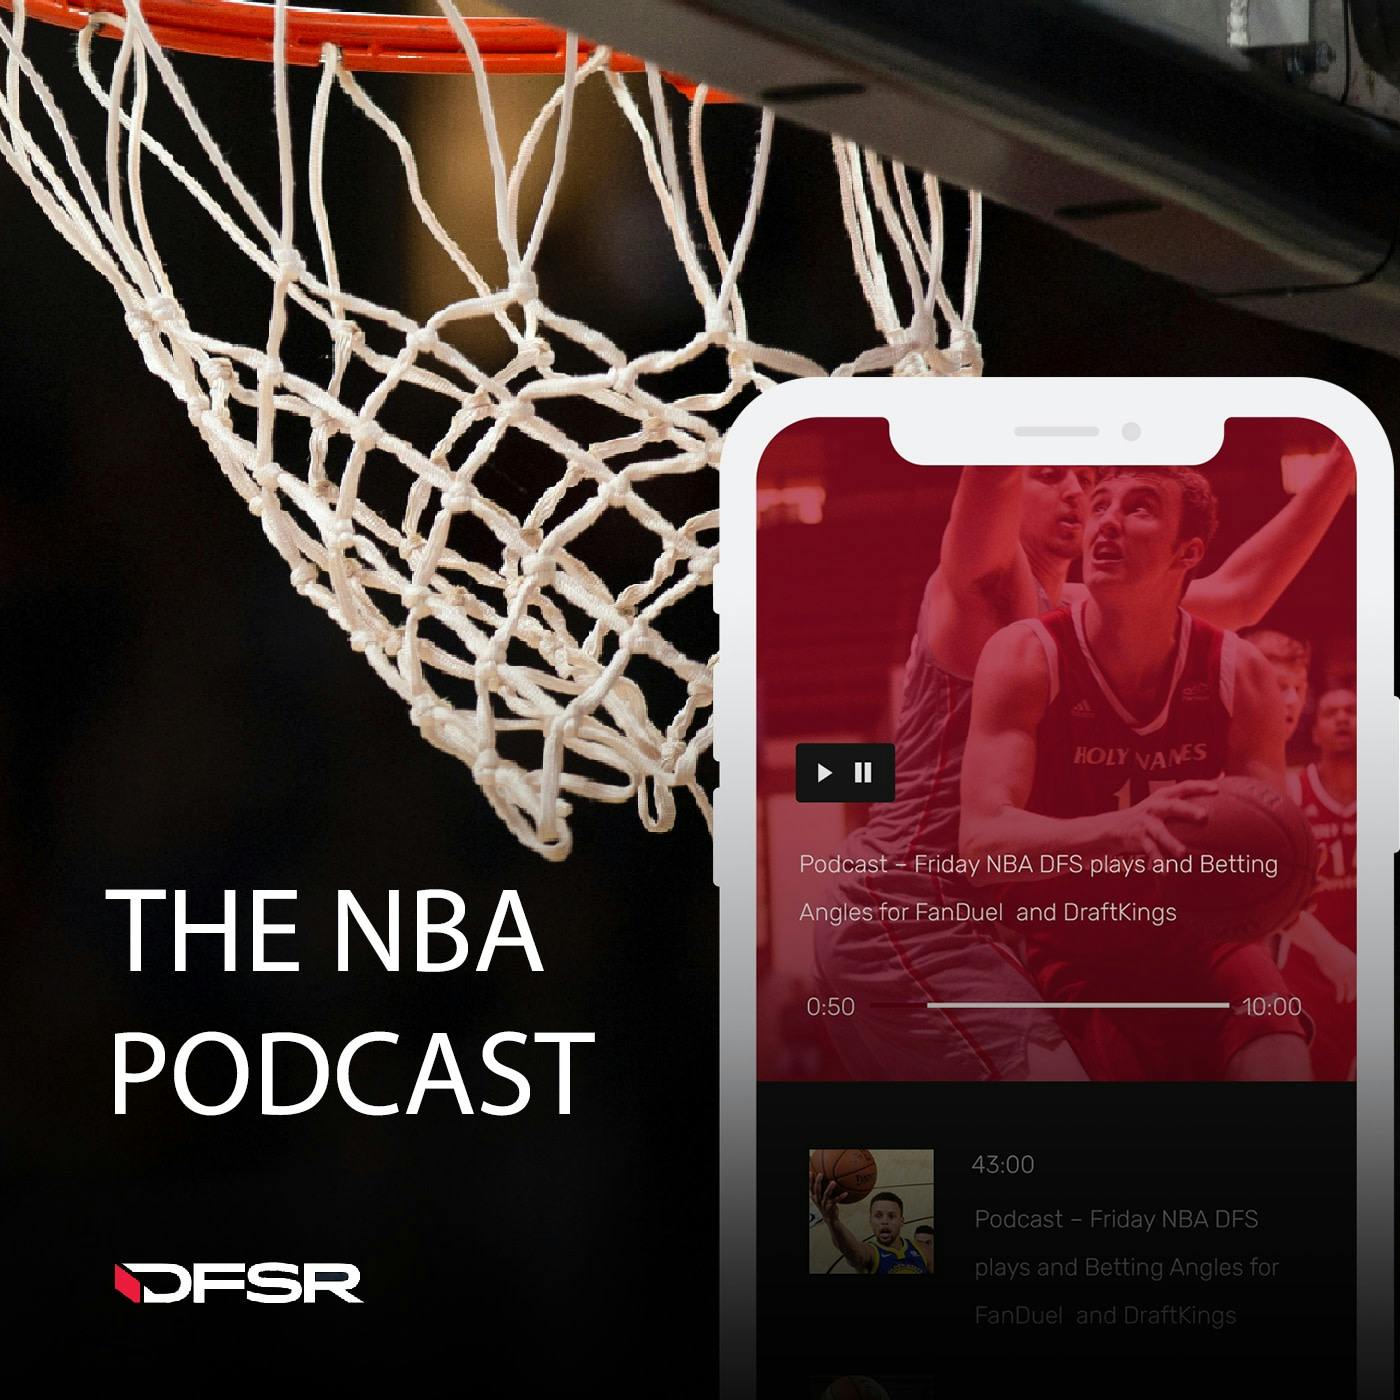 DFS NBA Podcast for FanDuel and DraftKings - Wednesday  11/21/18